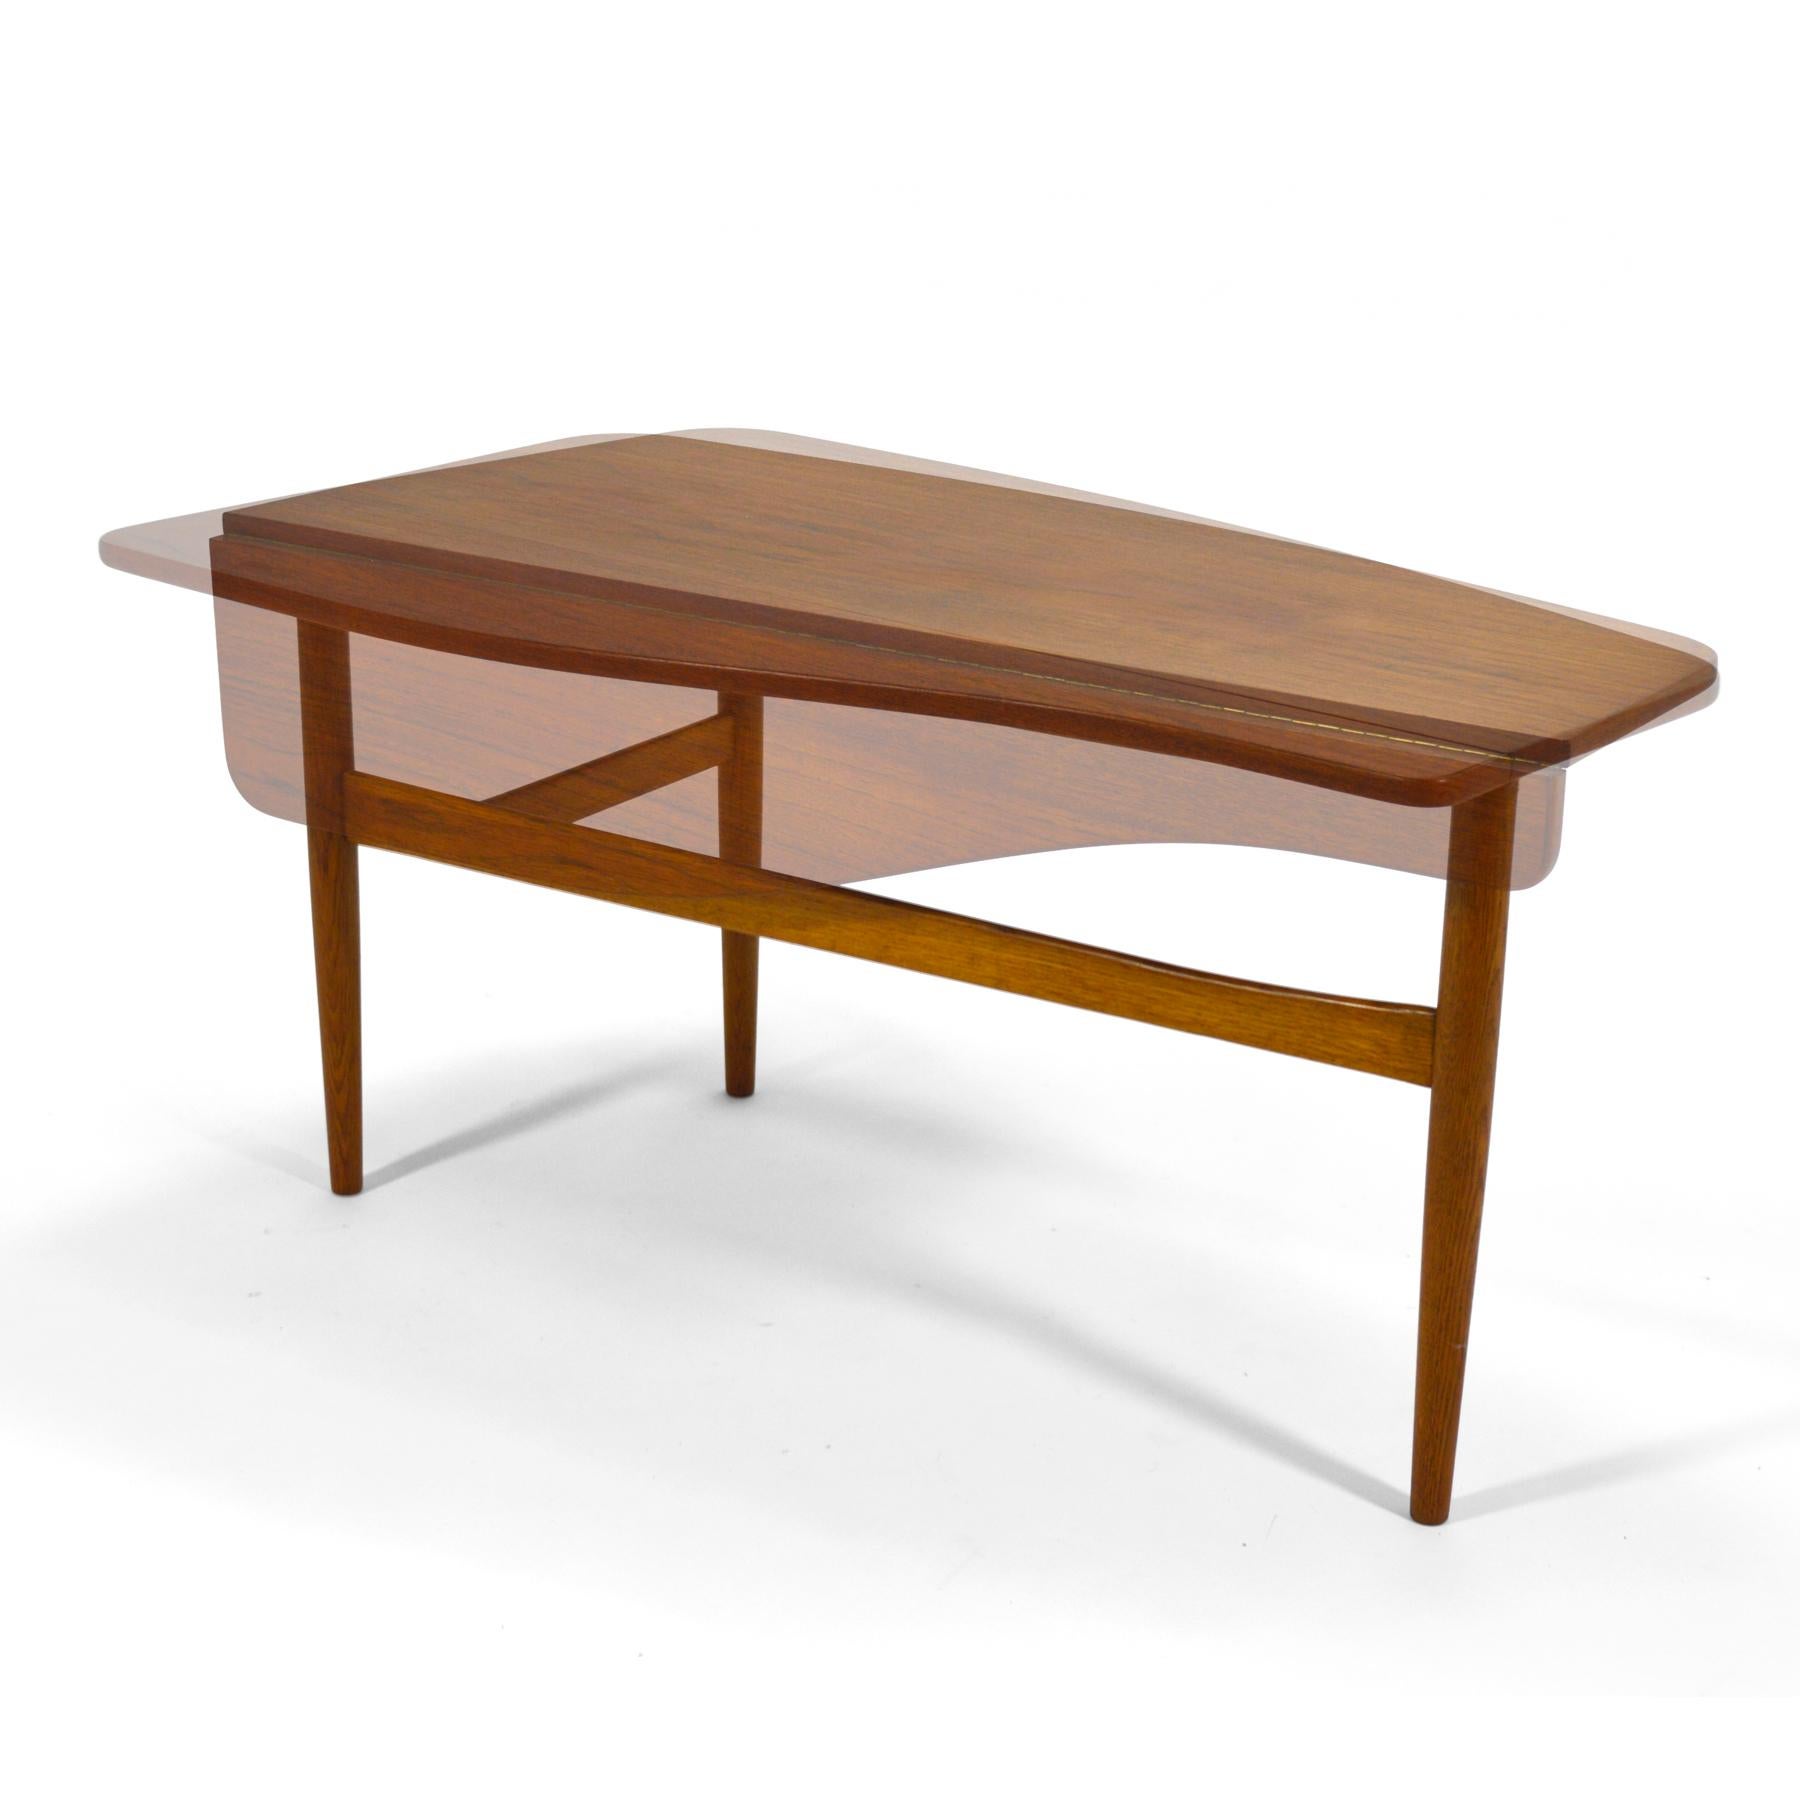 Finn Juhl Coffee Table with Drop-Leaf by Bovirke In Good Condition For Sale In Highland, IN